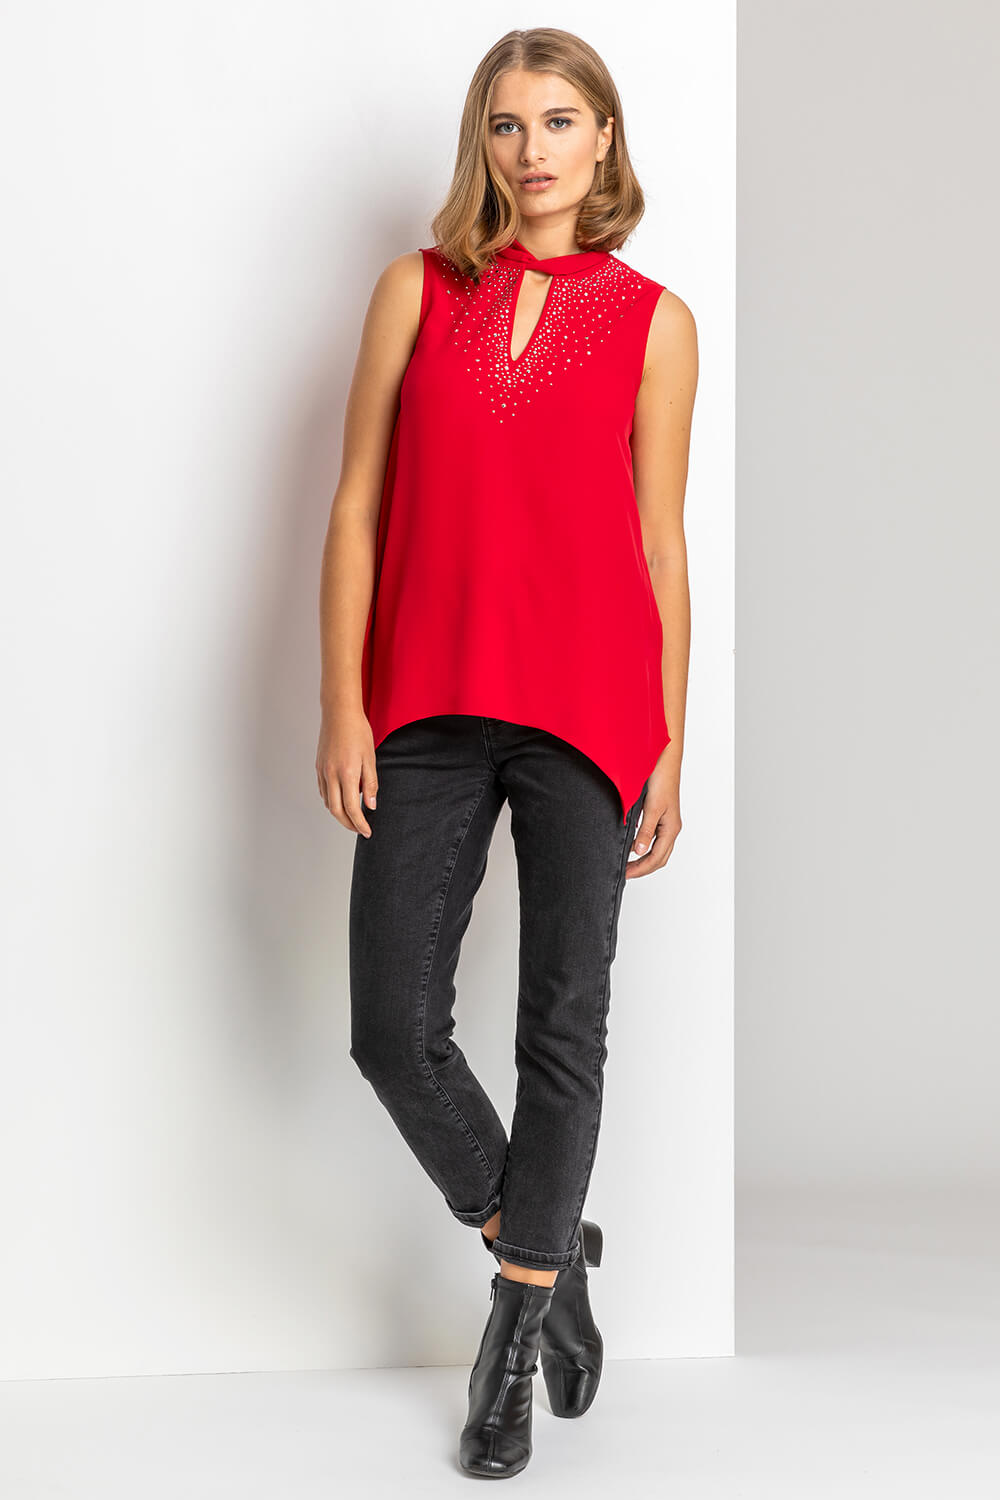 Red Sparkle High Neck Keyhole Top, Image 2 of 4